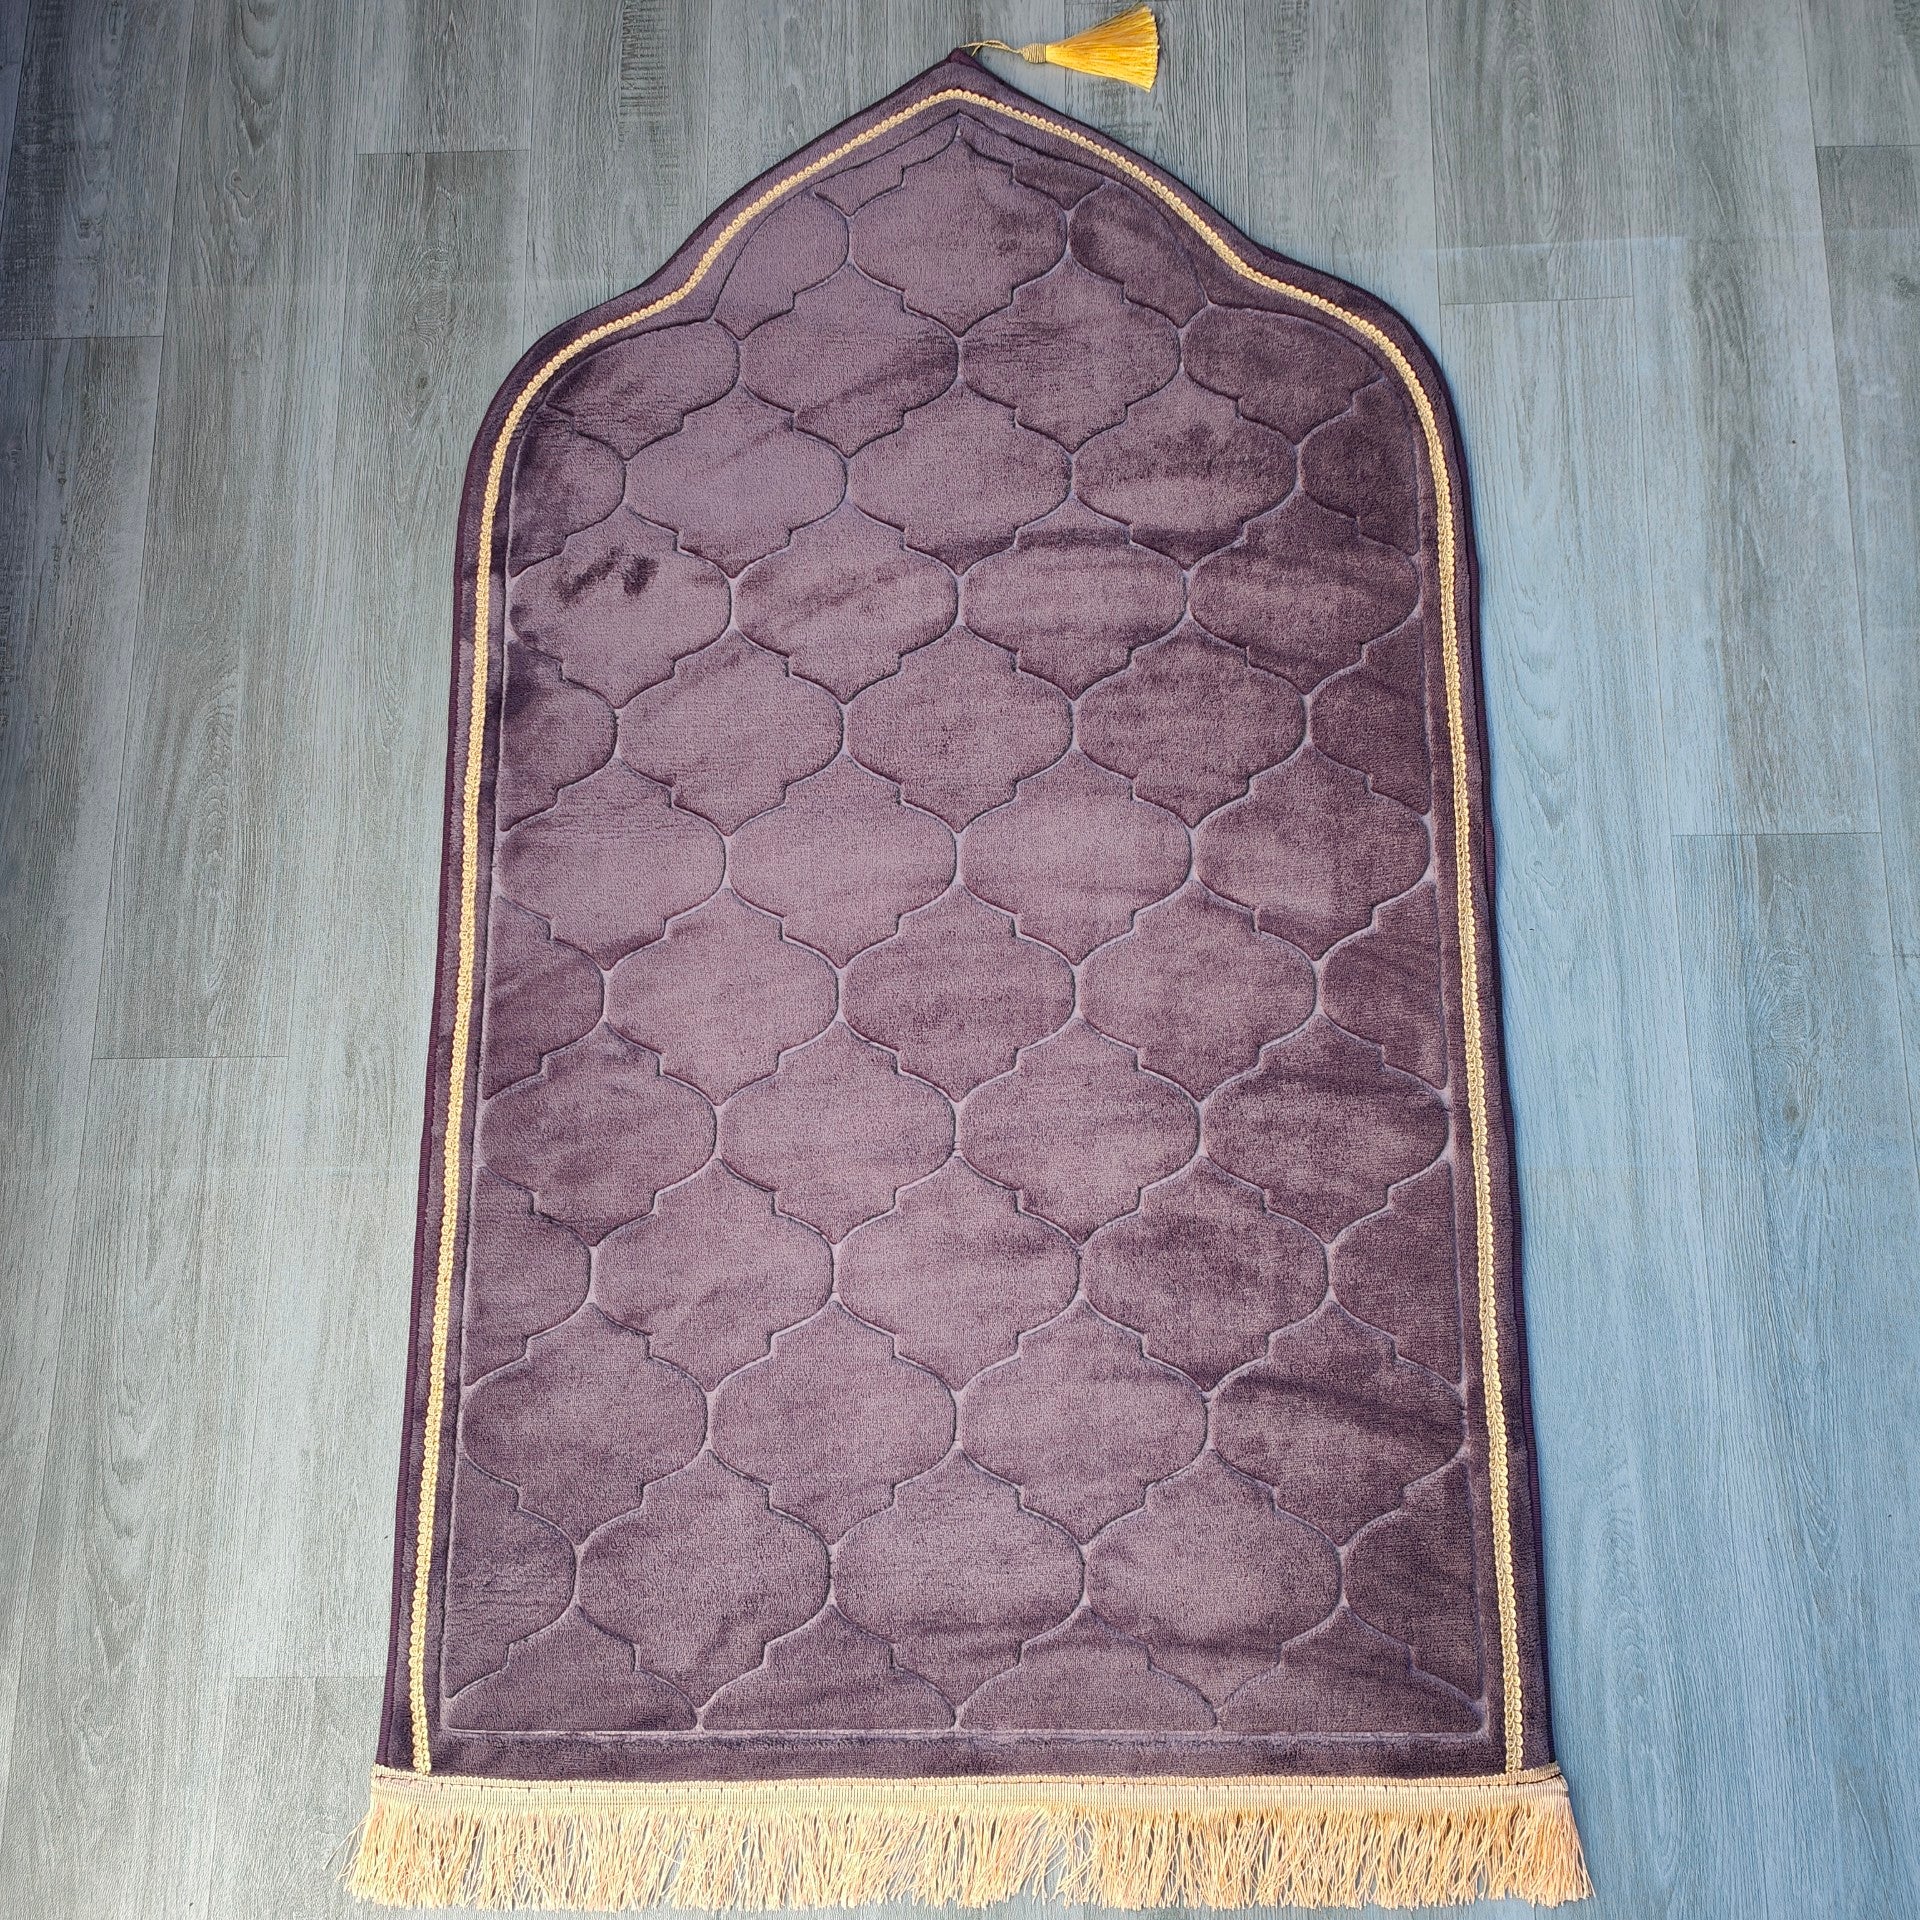 Introducing the exquisite Eggplant purple color prayer mat designed by Hikmah Boutique, a true masterpiece that embodies elegance, comfort, and spirituality. Measuring 110cm by 65cm, this prayer mat provides ample space for you to pray in peace and tranquility. This Prayer Mat is crafted with meticulous golden border.